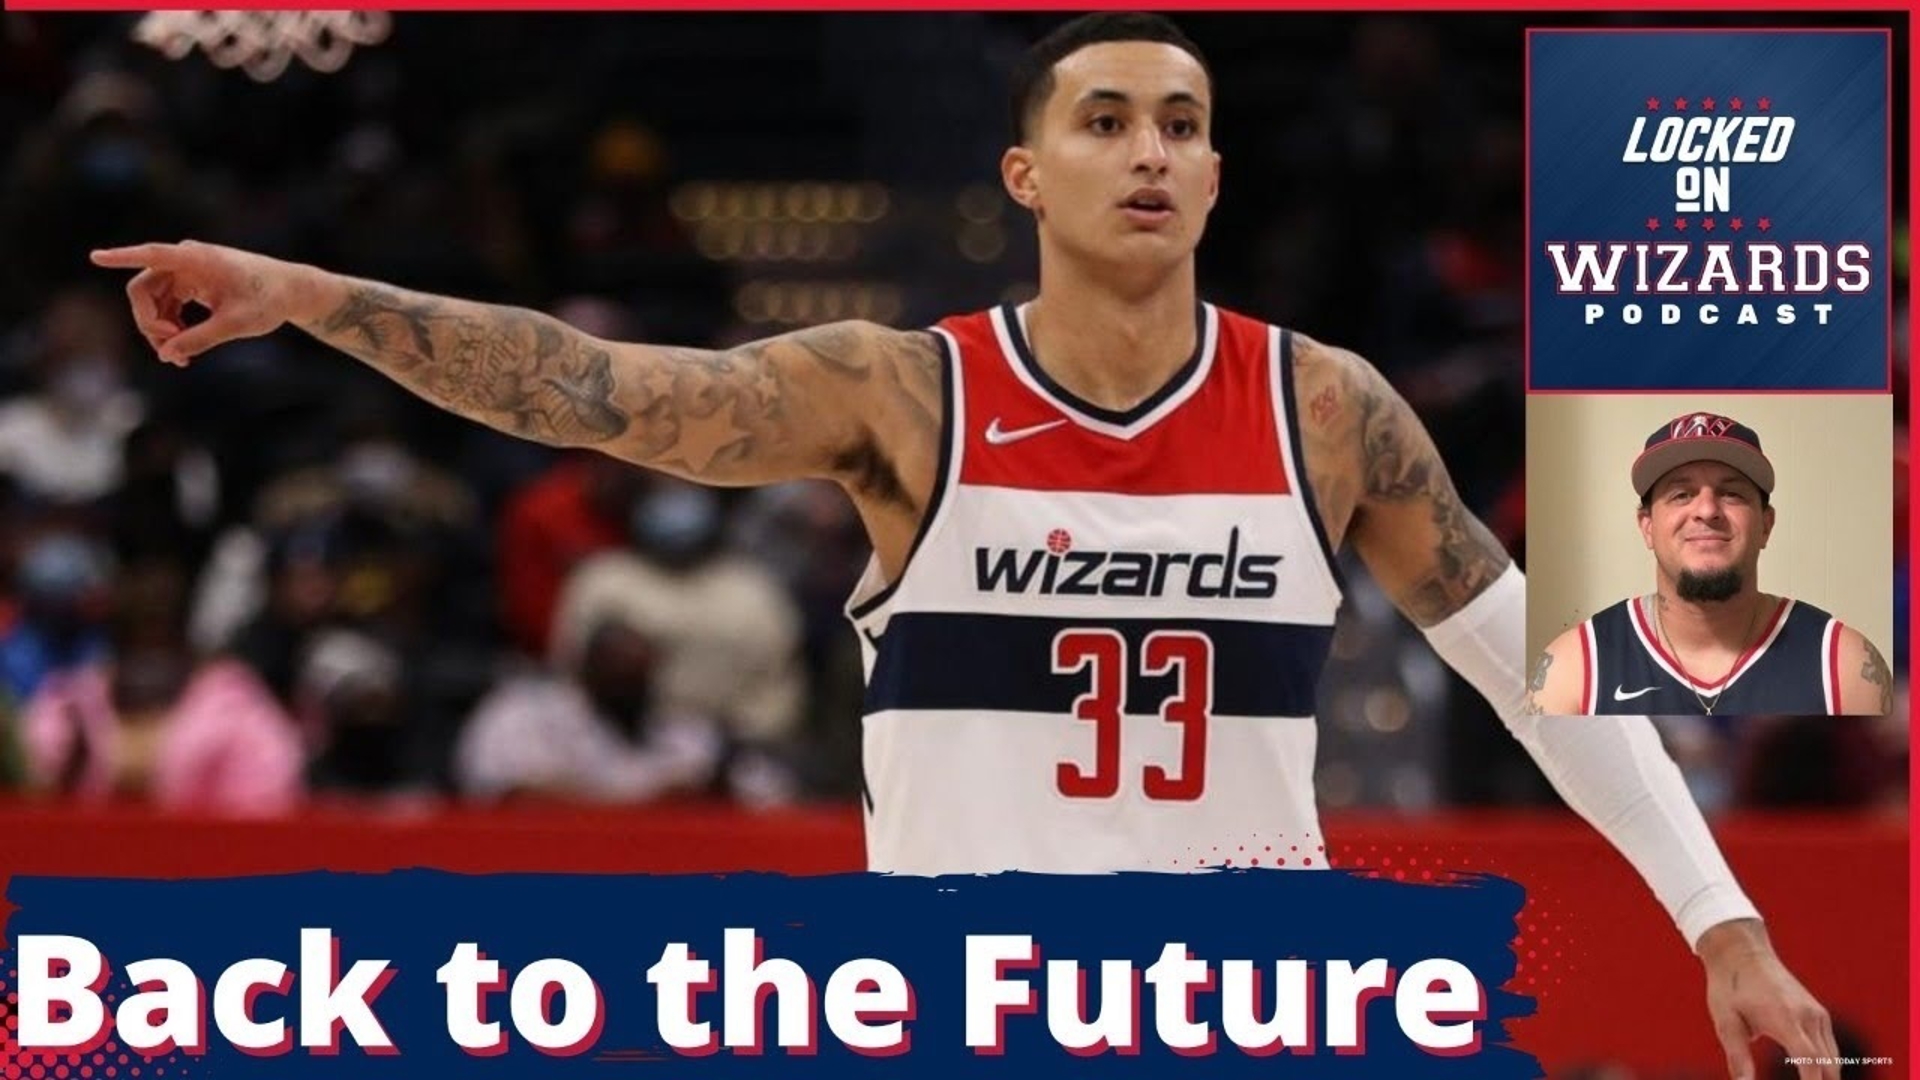 Brandon goes over 5-6 picks that could give the Wizards a chance at getting back into the lottery.